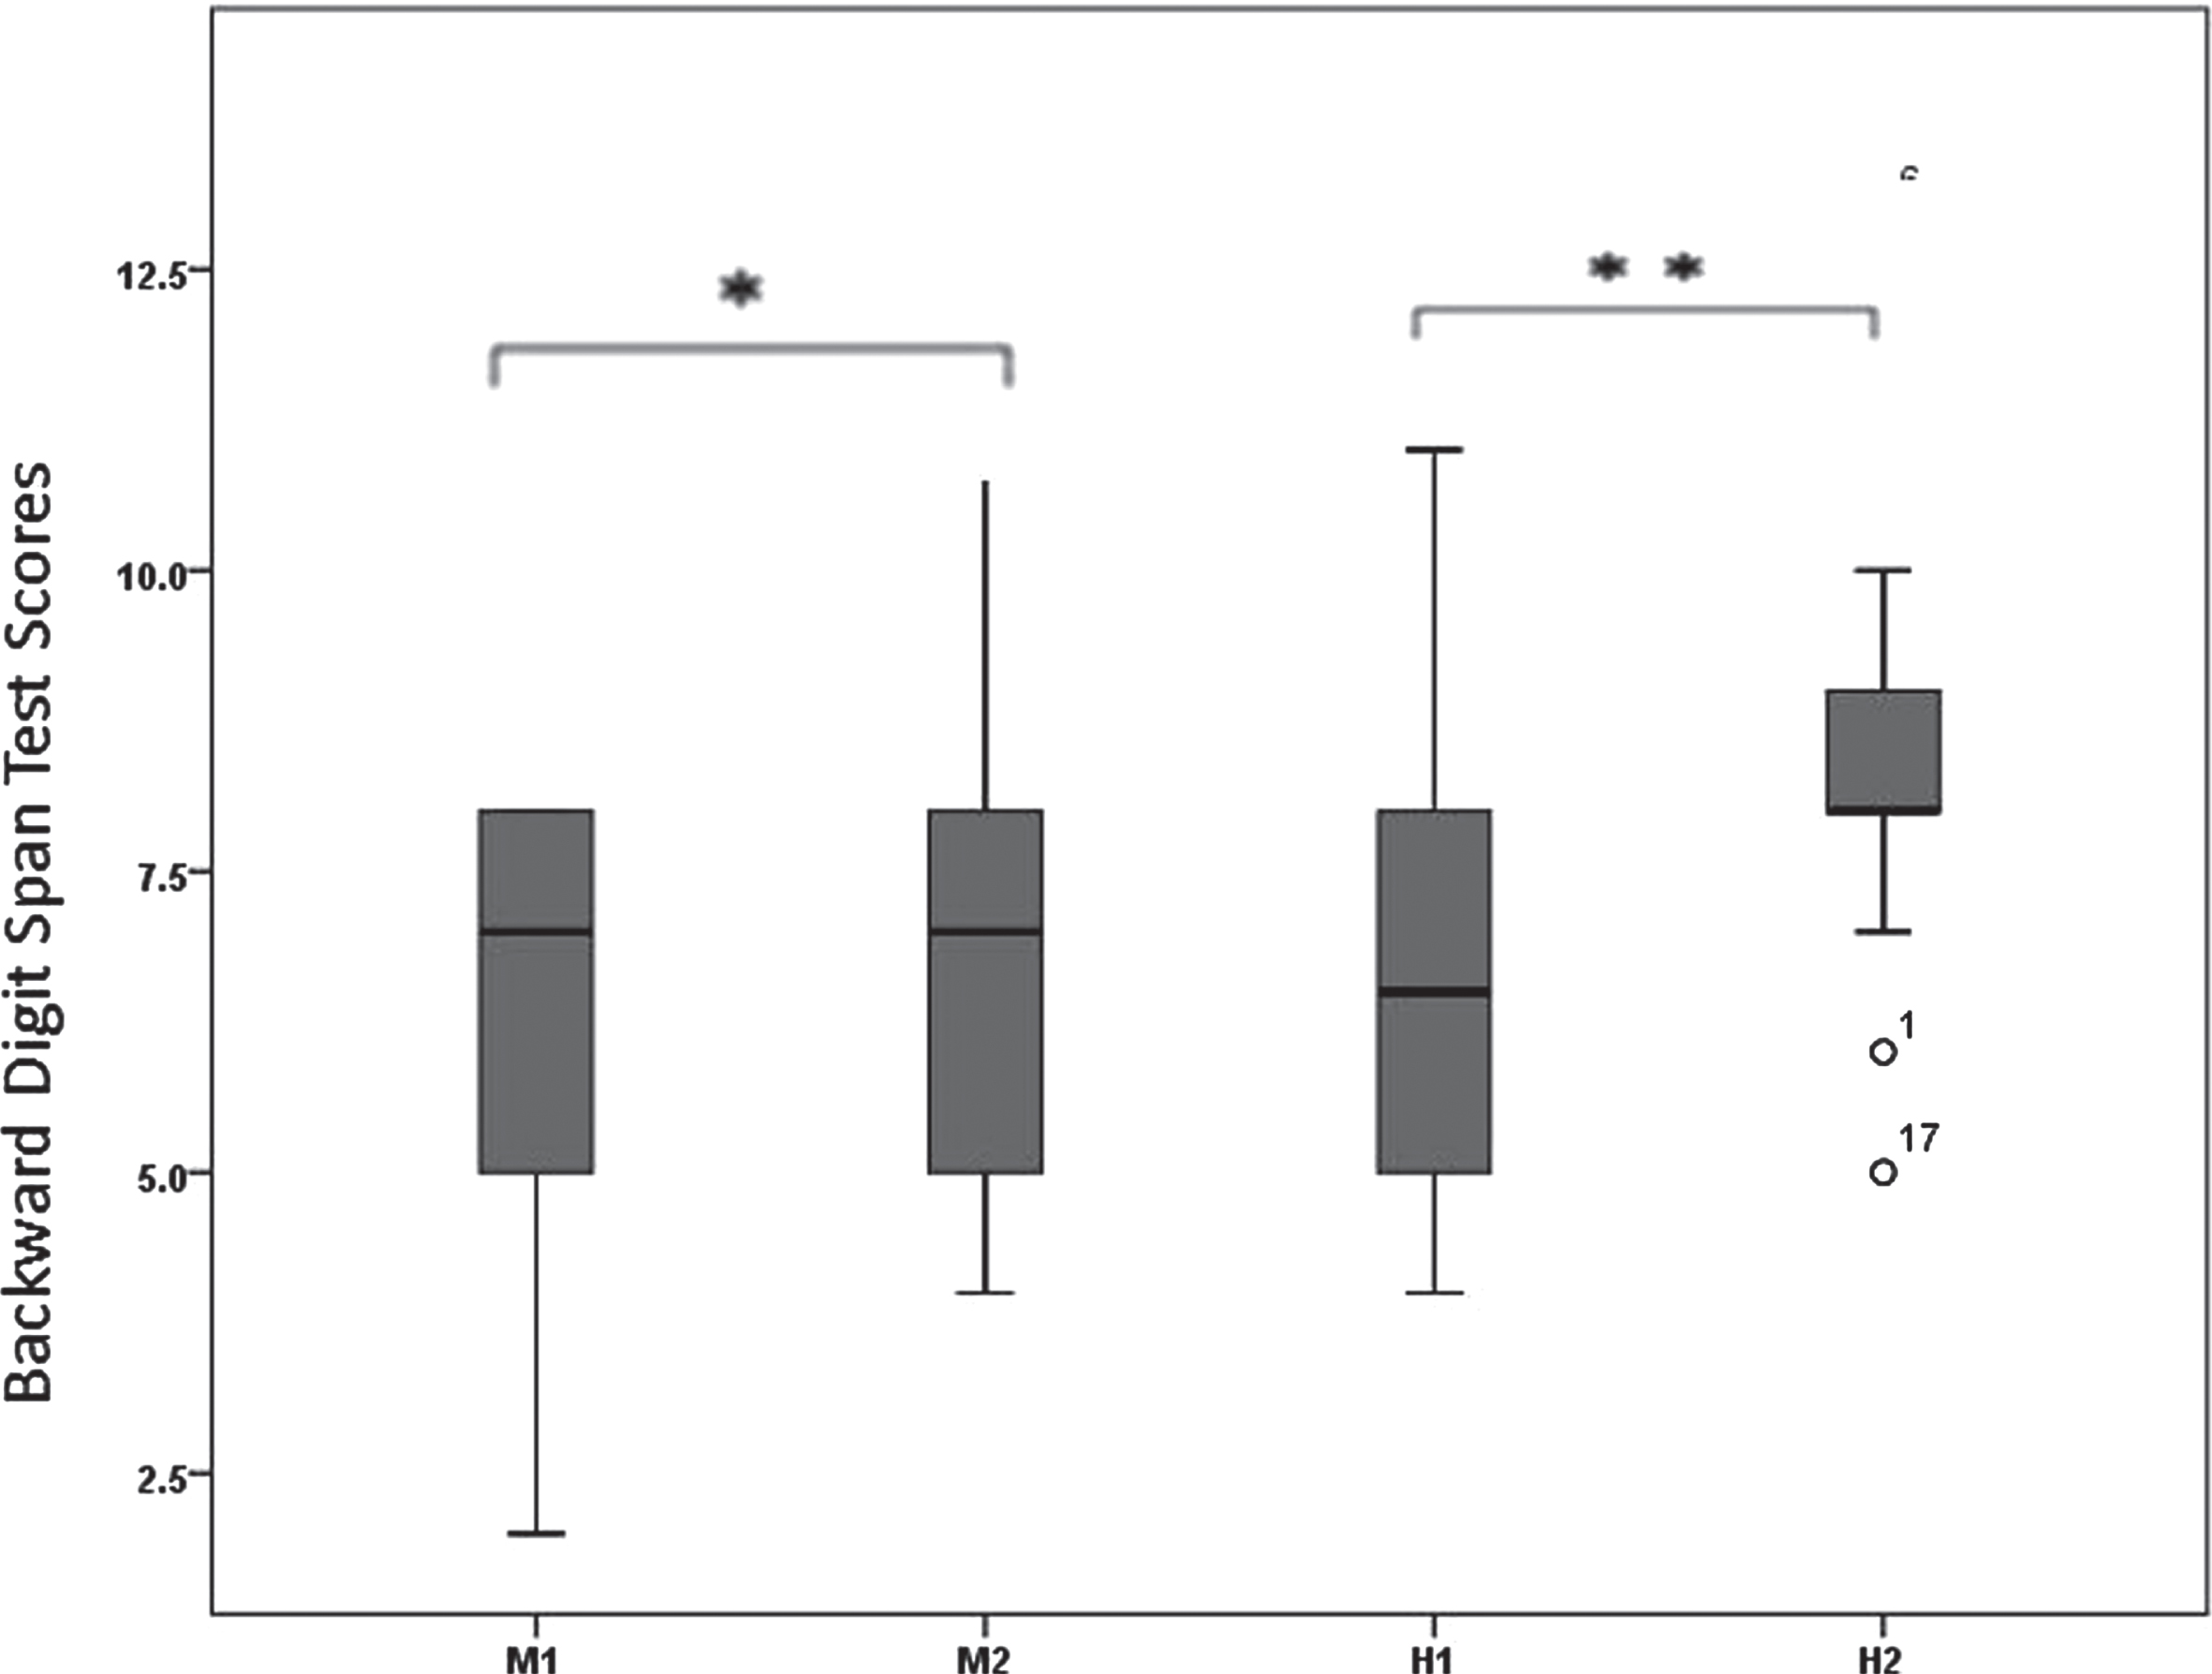 Box and Whisker plot of backward digit span test scores before and after moderate and high intensity interval exercise. Backward digit span test scores M1 = before moderate exercise, M2 = after moderate exercise, H1 = before high intensity interval, H2 = after high intensity interval exercise.